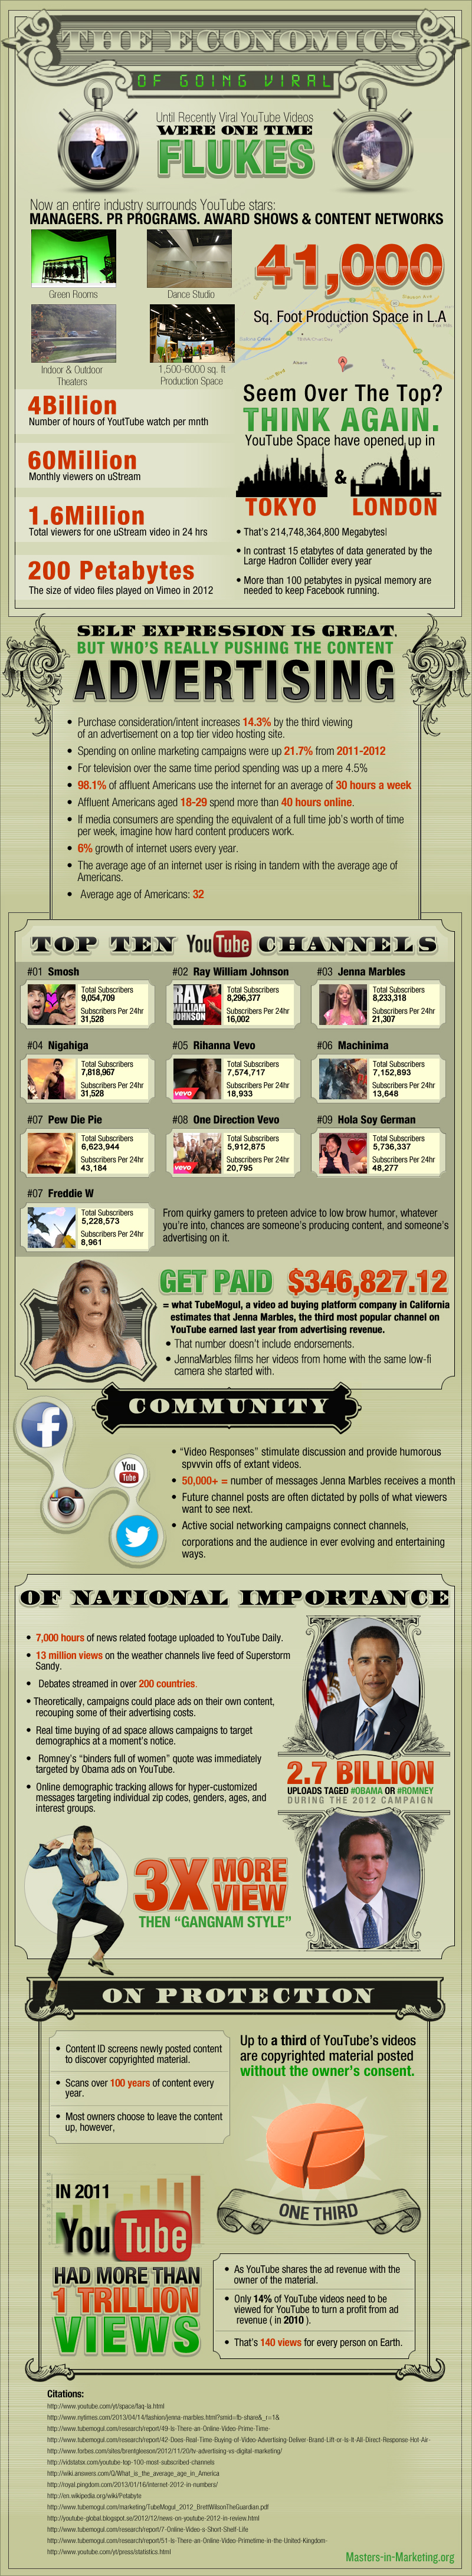 Infographic on the Facts and Figures of YouTbe Viral Video